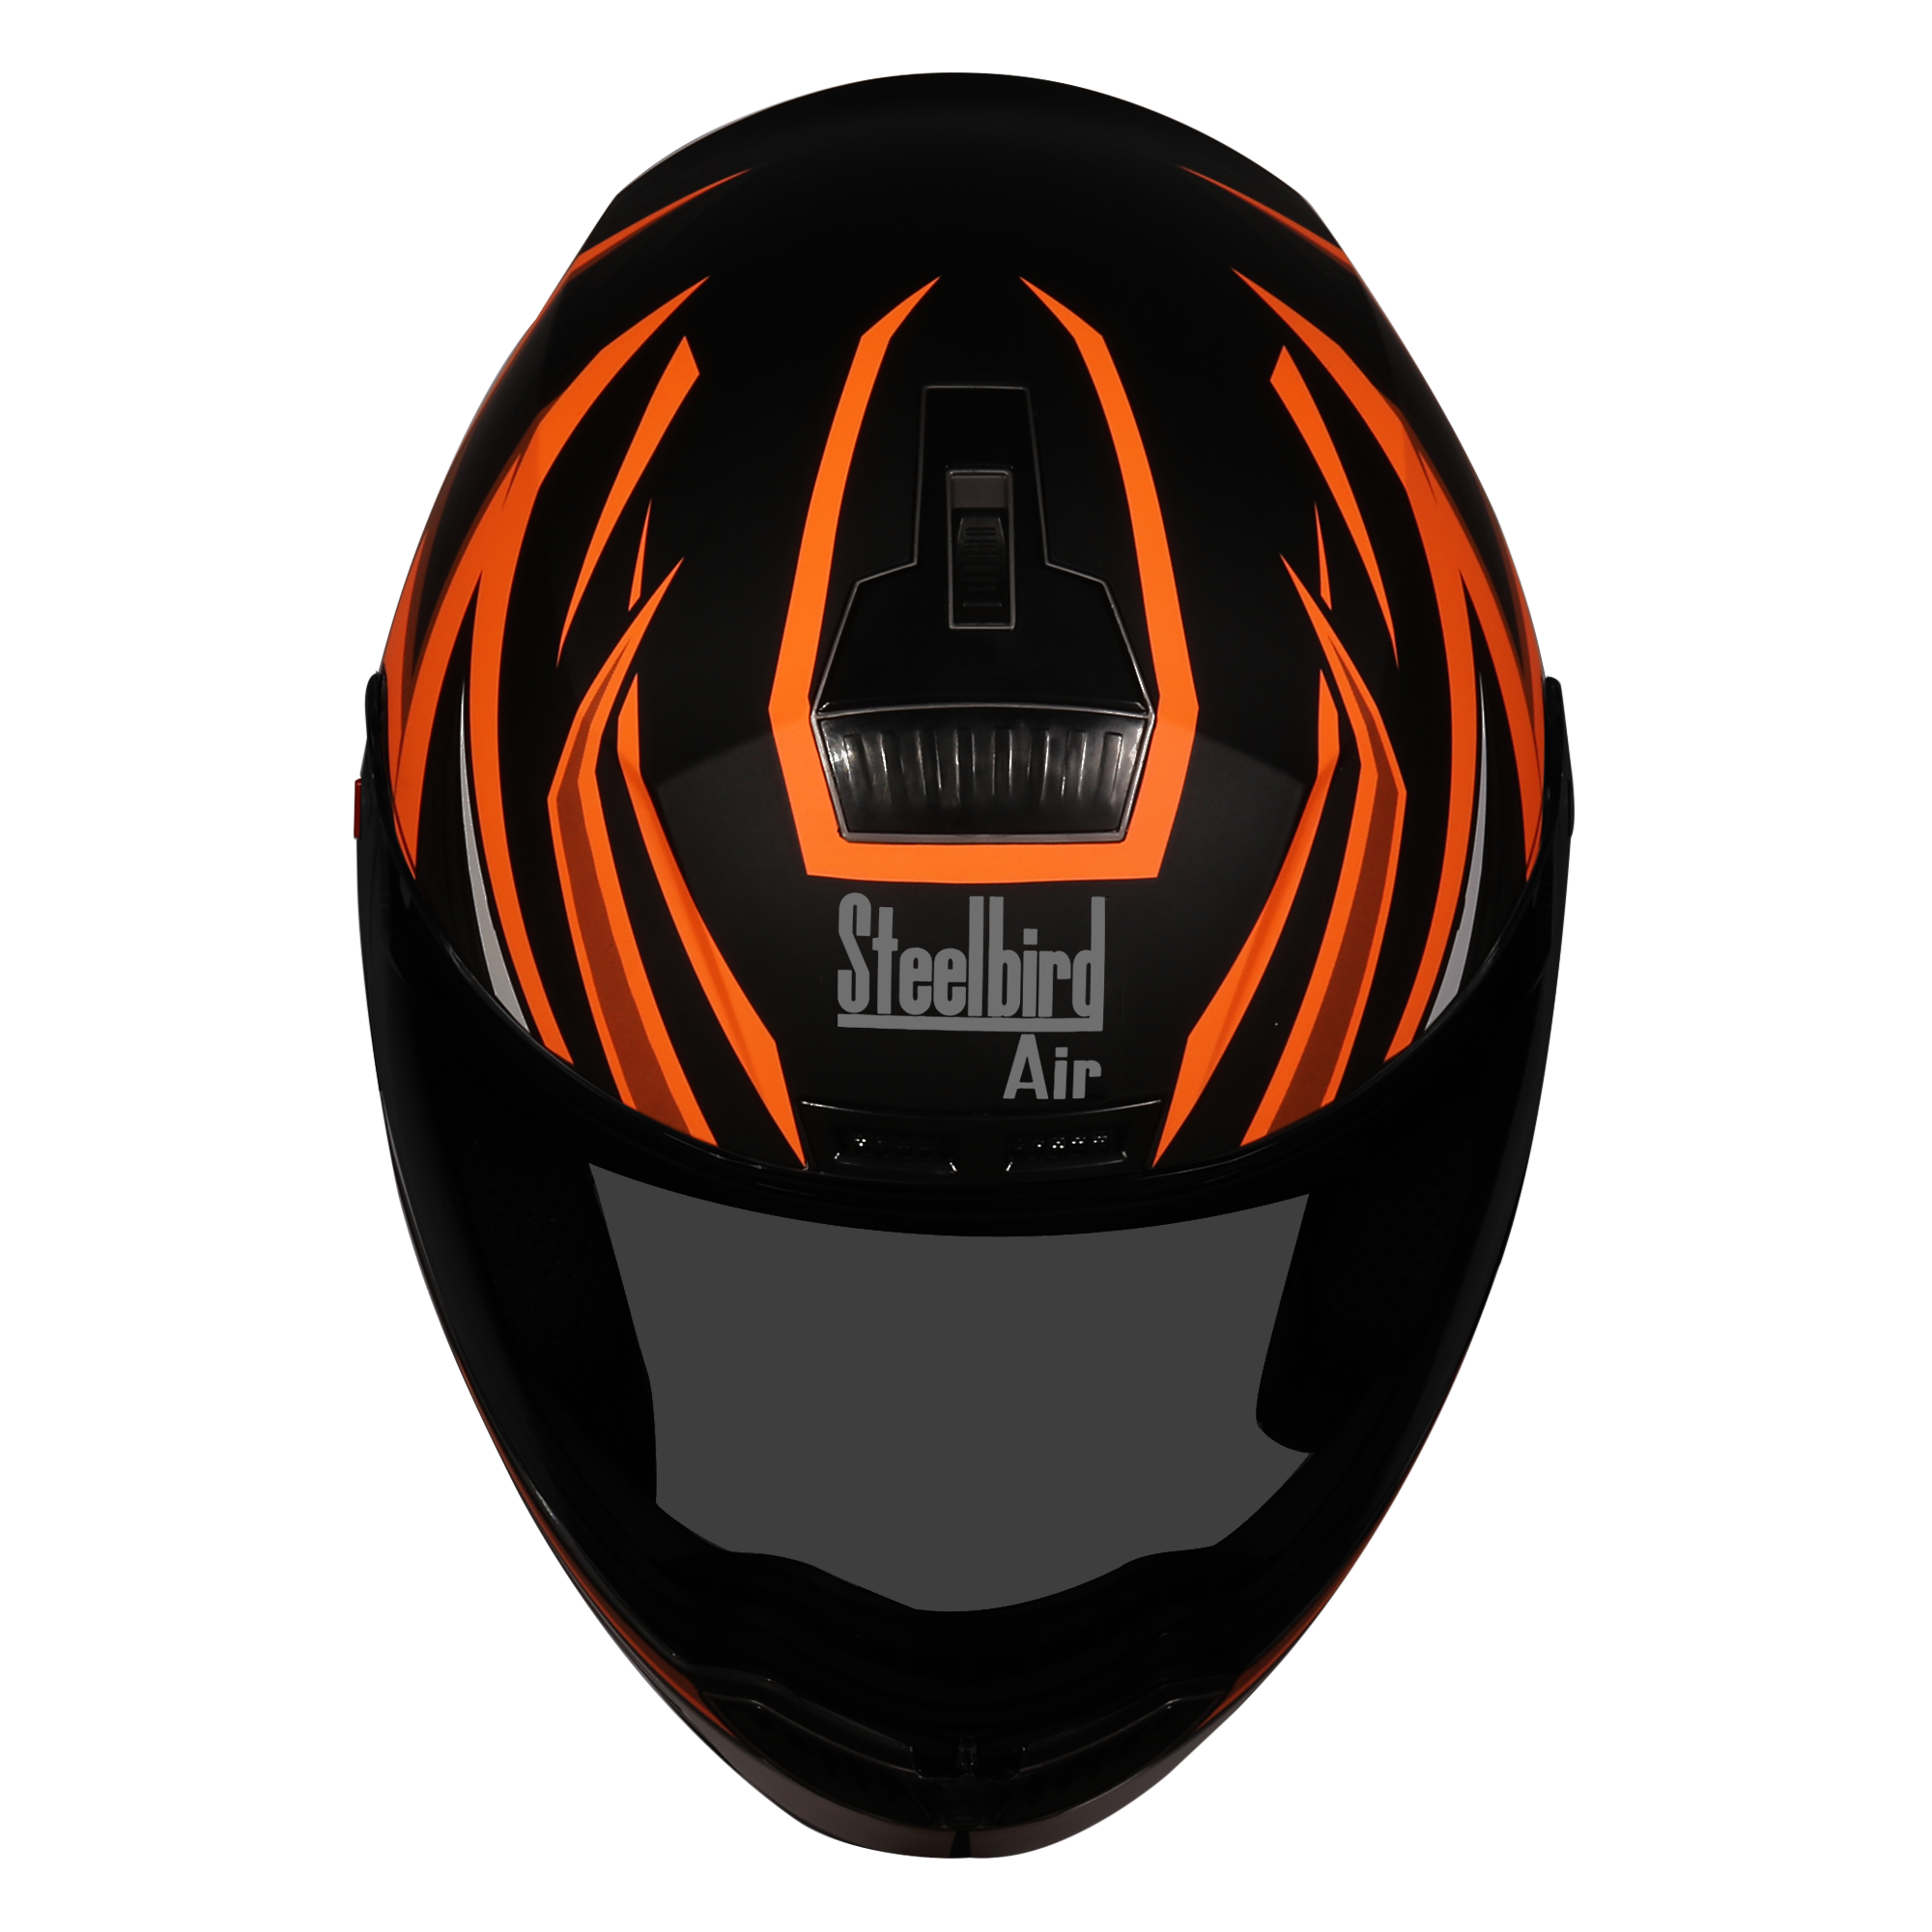 SBA-1 THRYL Mat Black With Orange ( Fitted With Clear Visor Extra Blue Chrome Visor Free)